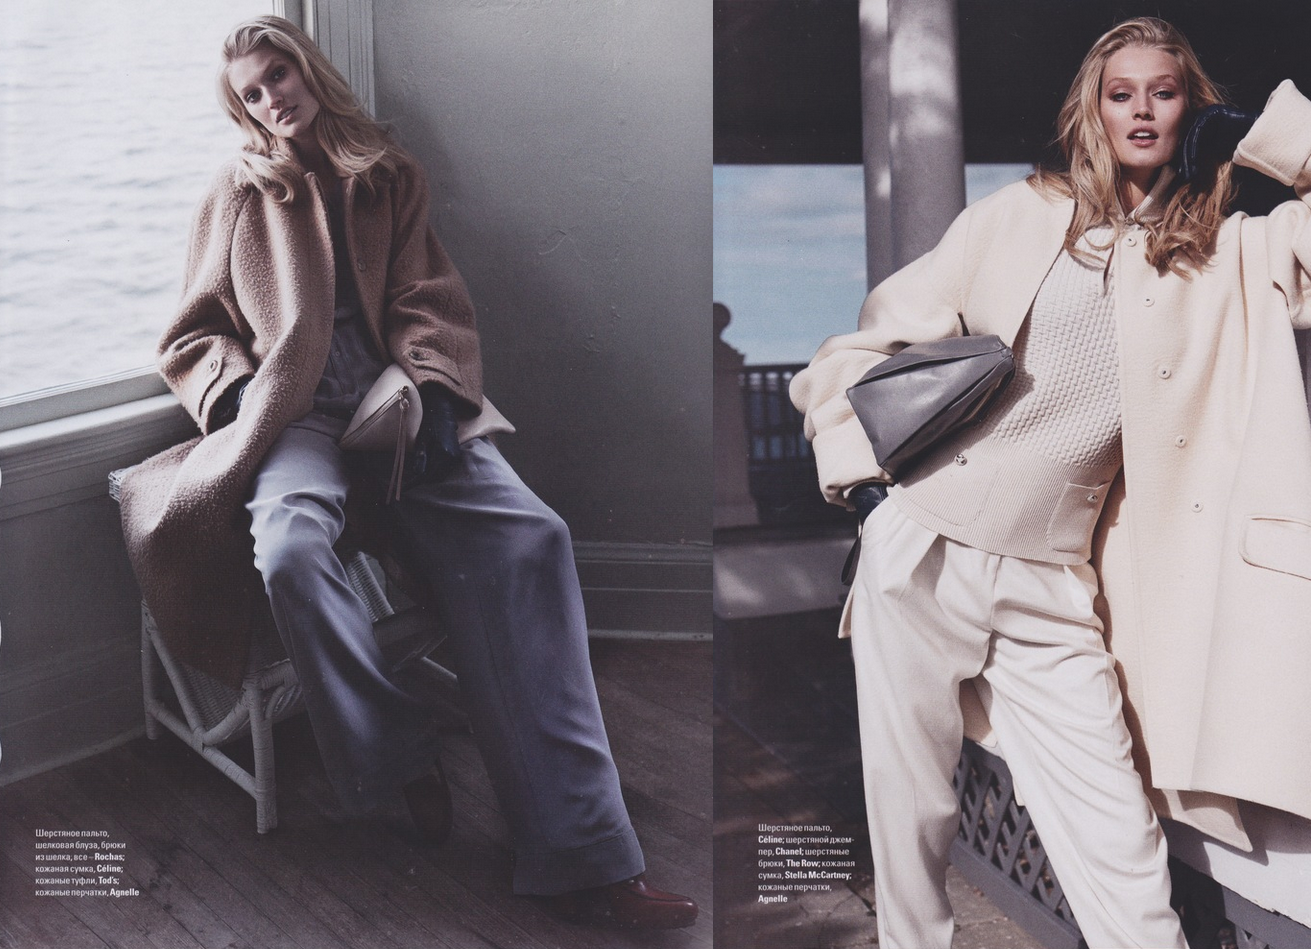 toni garrn photo shoot for vogue ukraine by benny horne and county fair productions 11